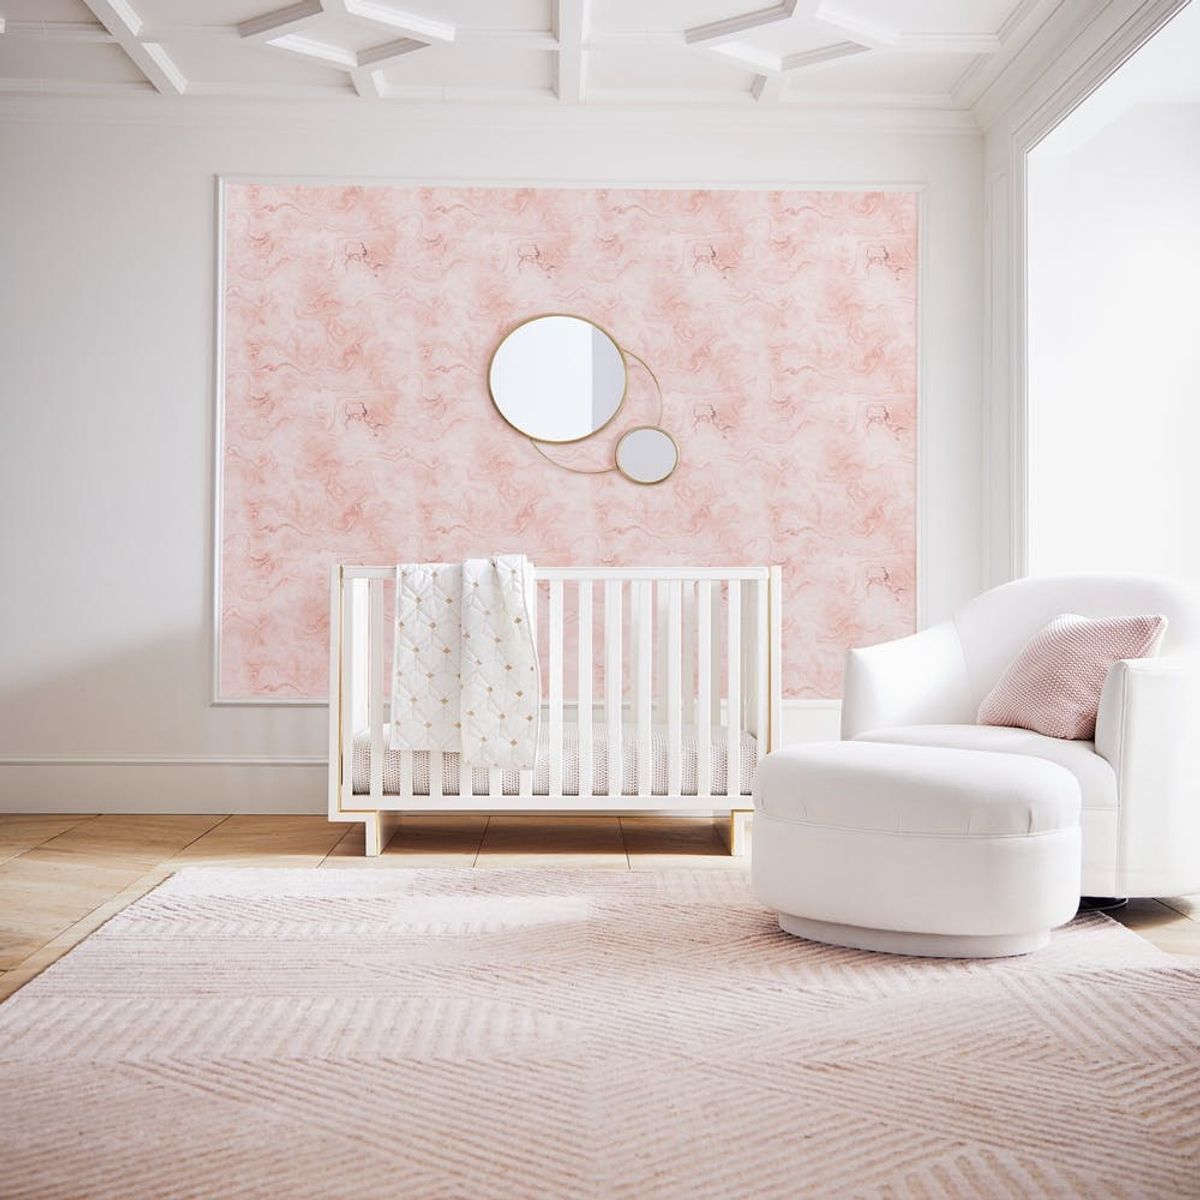 This Nursery Wallpaper Collab Is So Stylish We Want It in Our Room